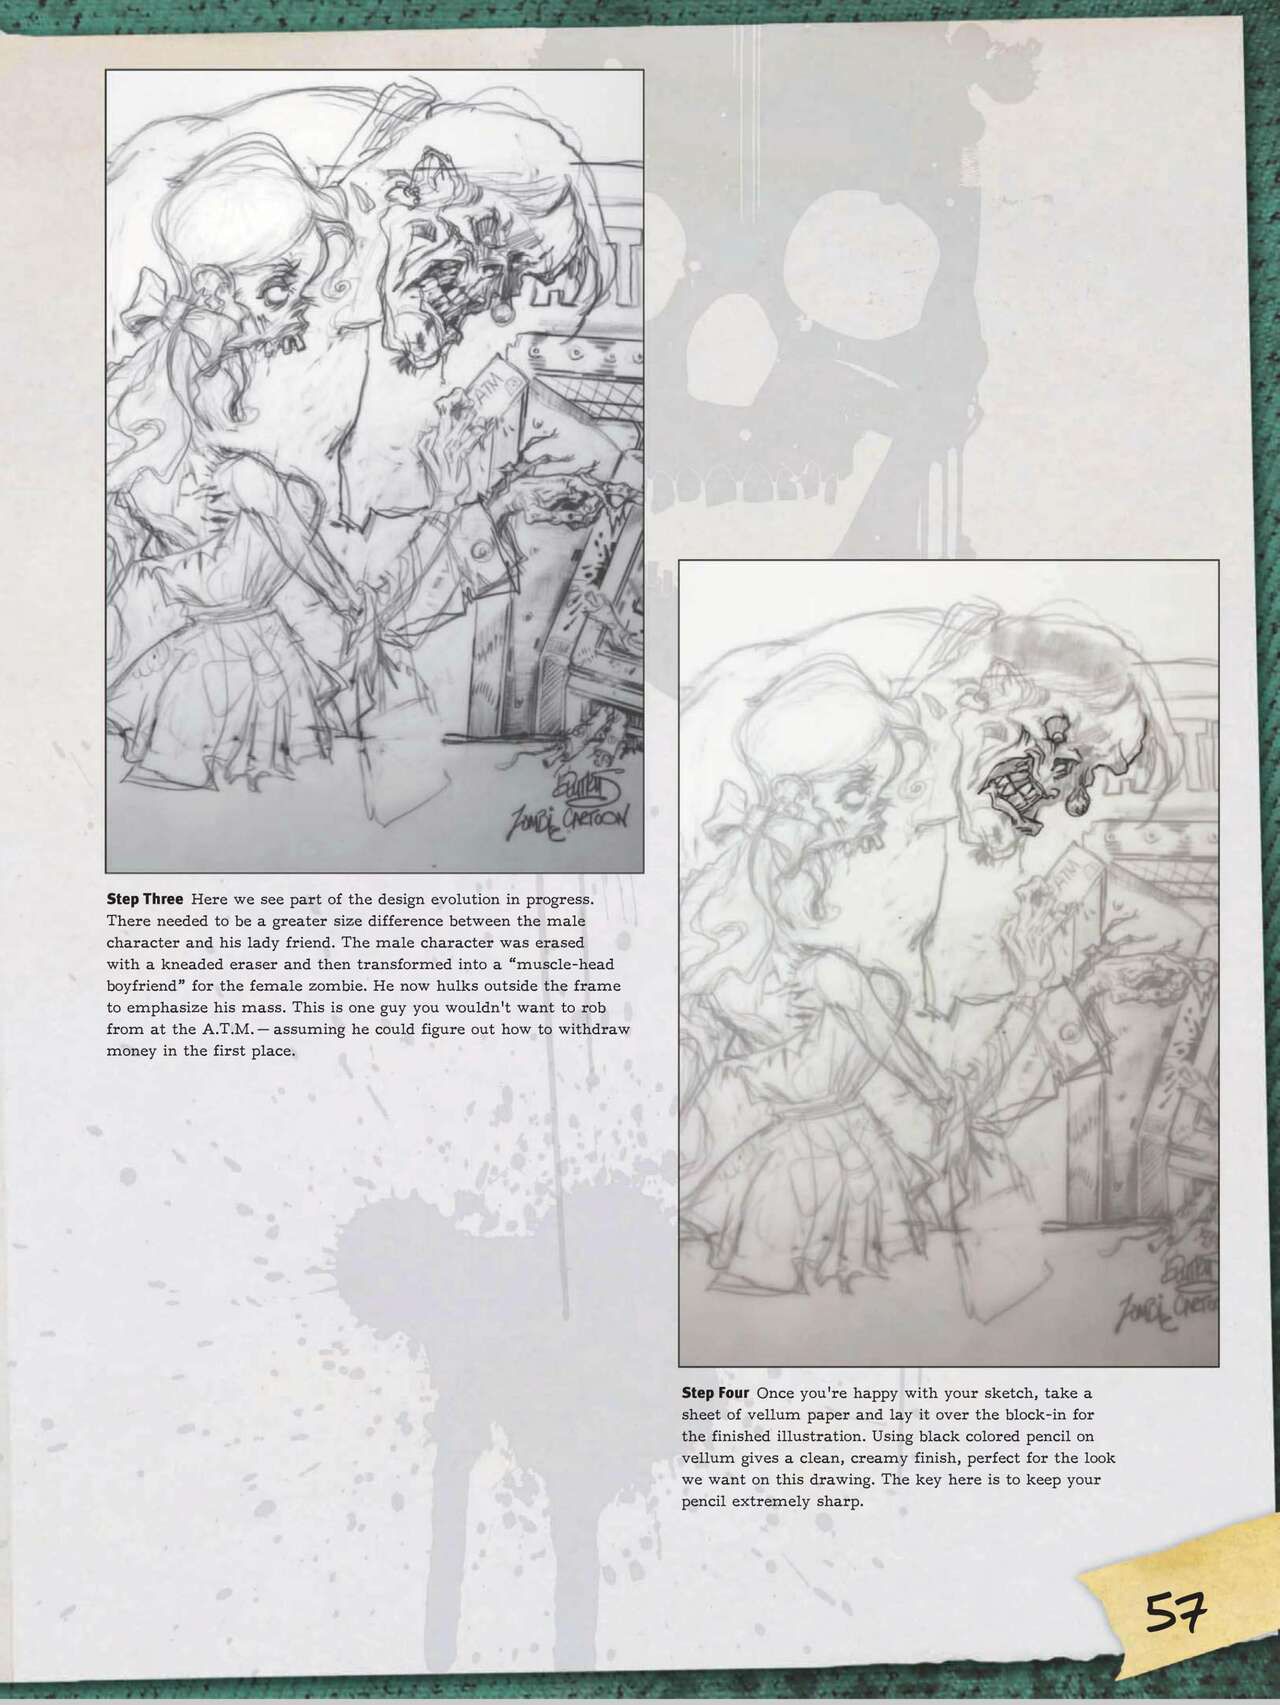 How to Draw Zombies: Discover the secrets to drawing, painting, and illustrating the undead 僵尸描绘集 58